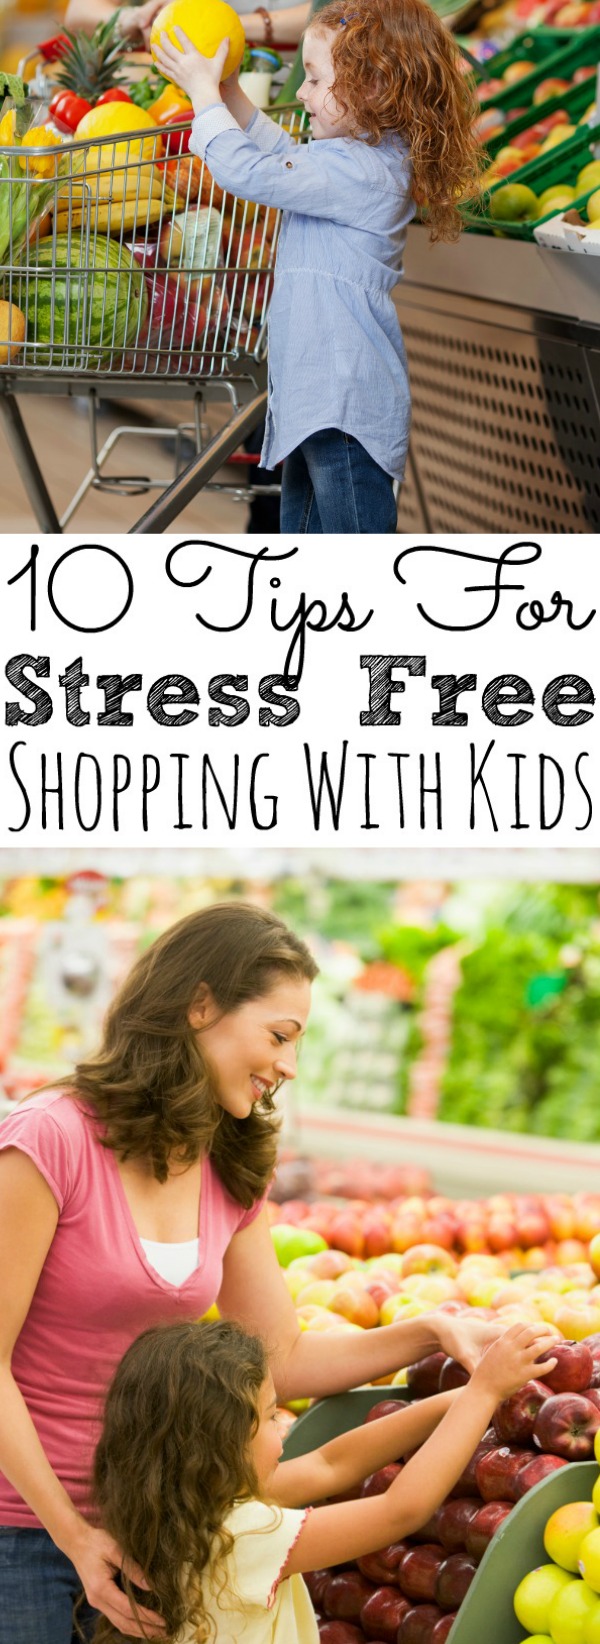 How To Shop With Kids Stress Free